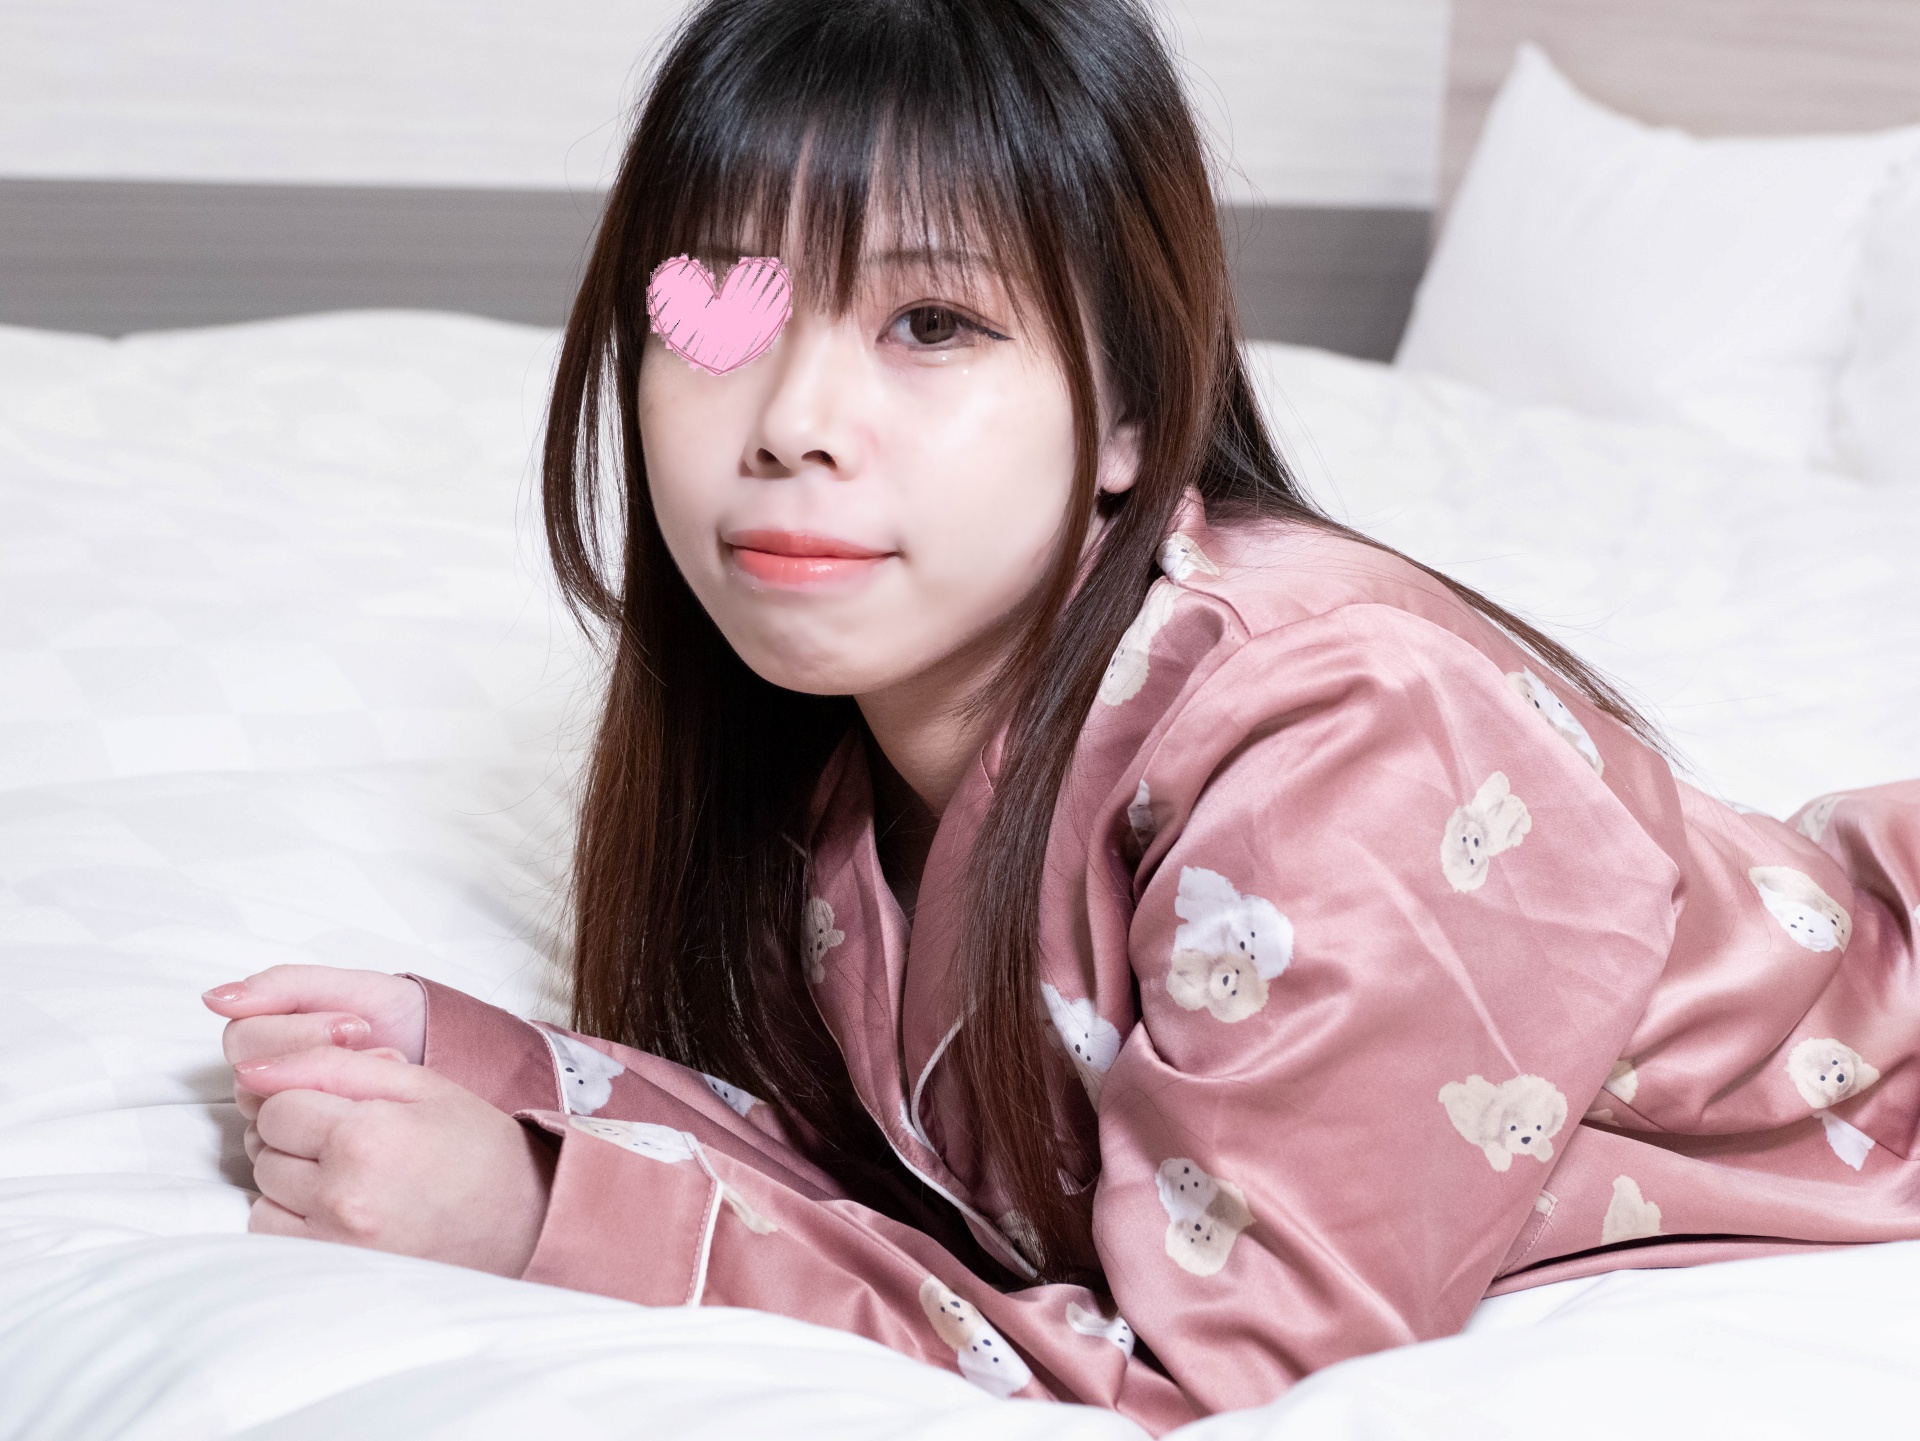 FC2PPV 4472110 [Pajamas Monashi] Pajamas De Intrusion ♥ Ray-San With A Cheerful Personality ♥ Her Petite And Cute Appearance Is Adorable ♥ She Gives A Blowjob Deep Even Though She Wasn’t Asked ♥ Her Way Of Feeling Is Also Very Erotic